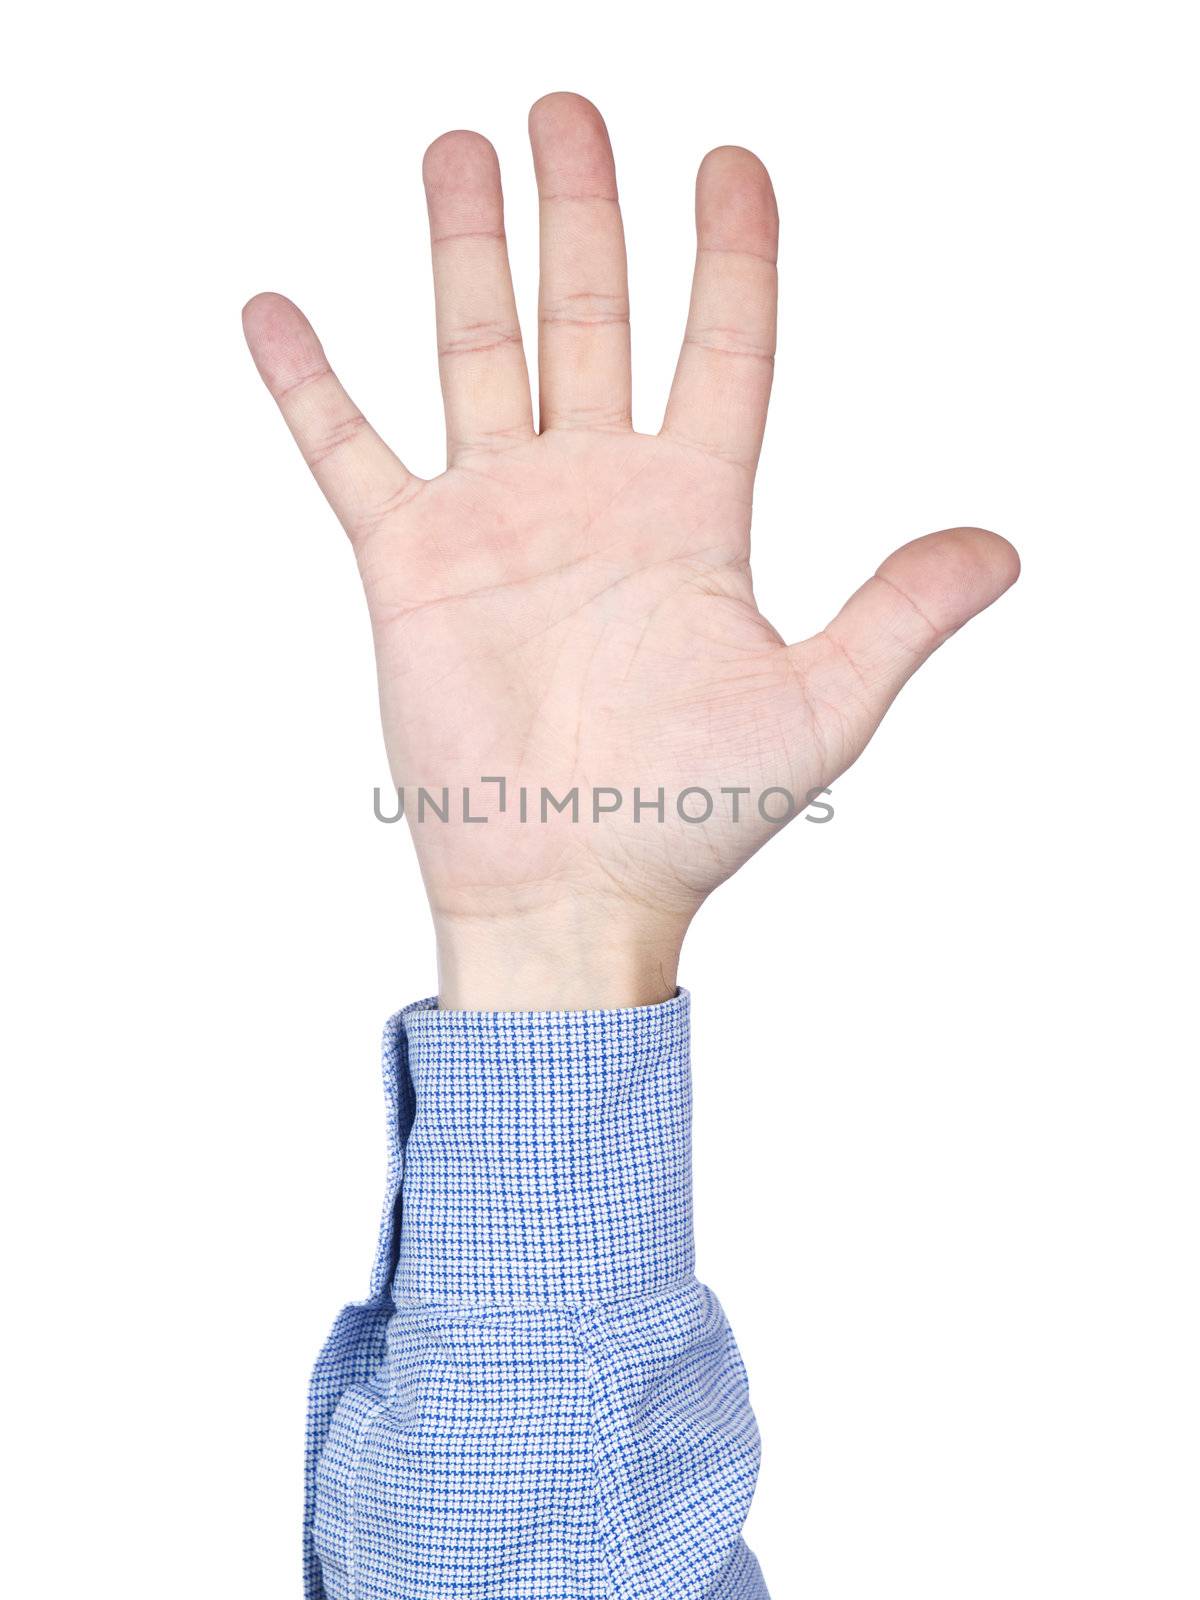 A man's hand doing number 5 gesture, isolated on white background.